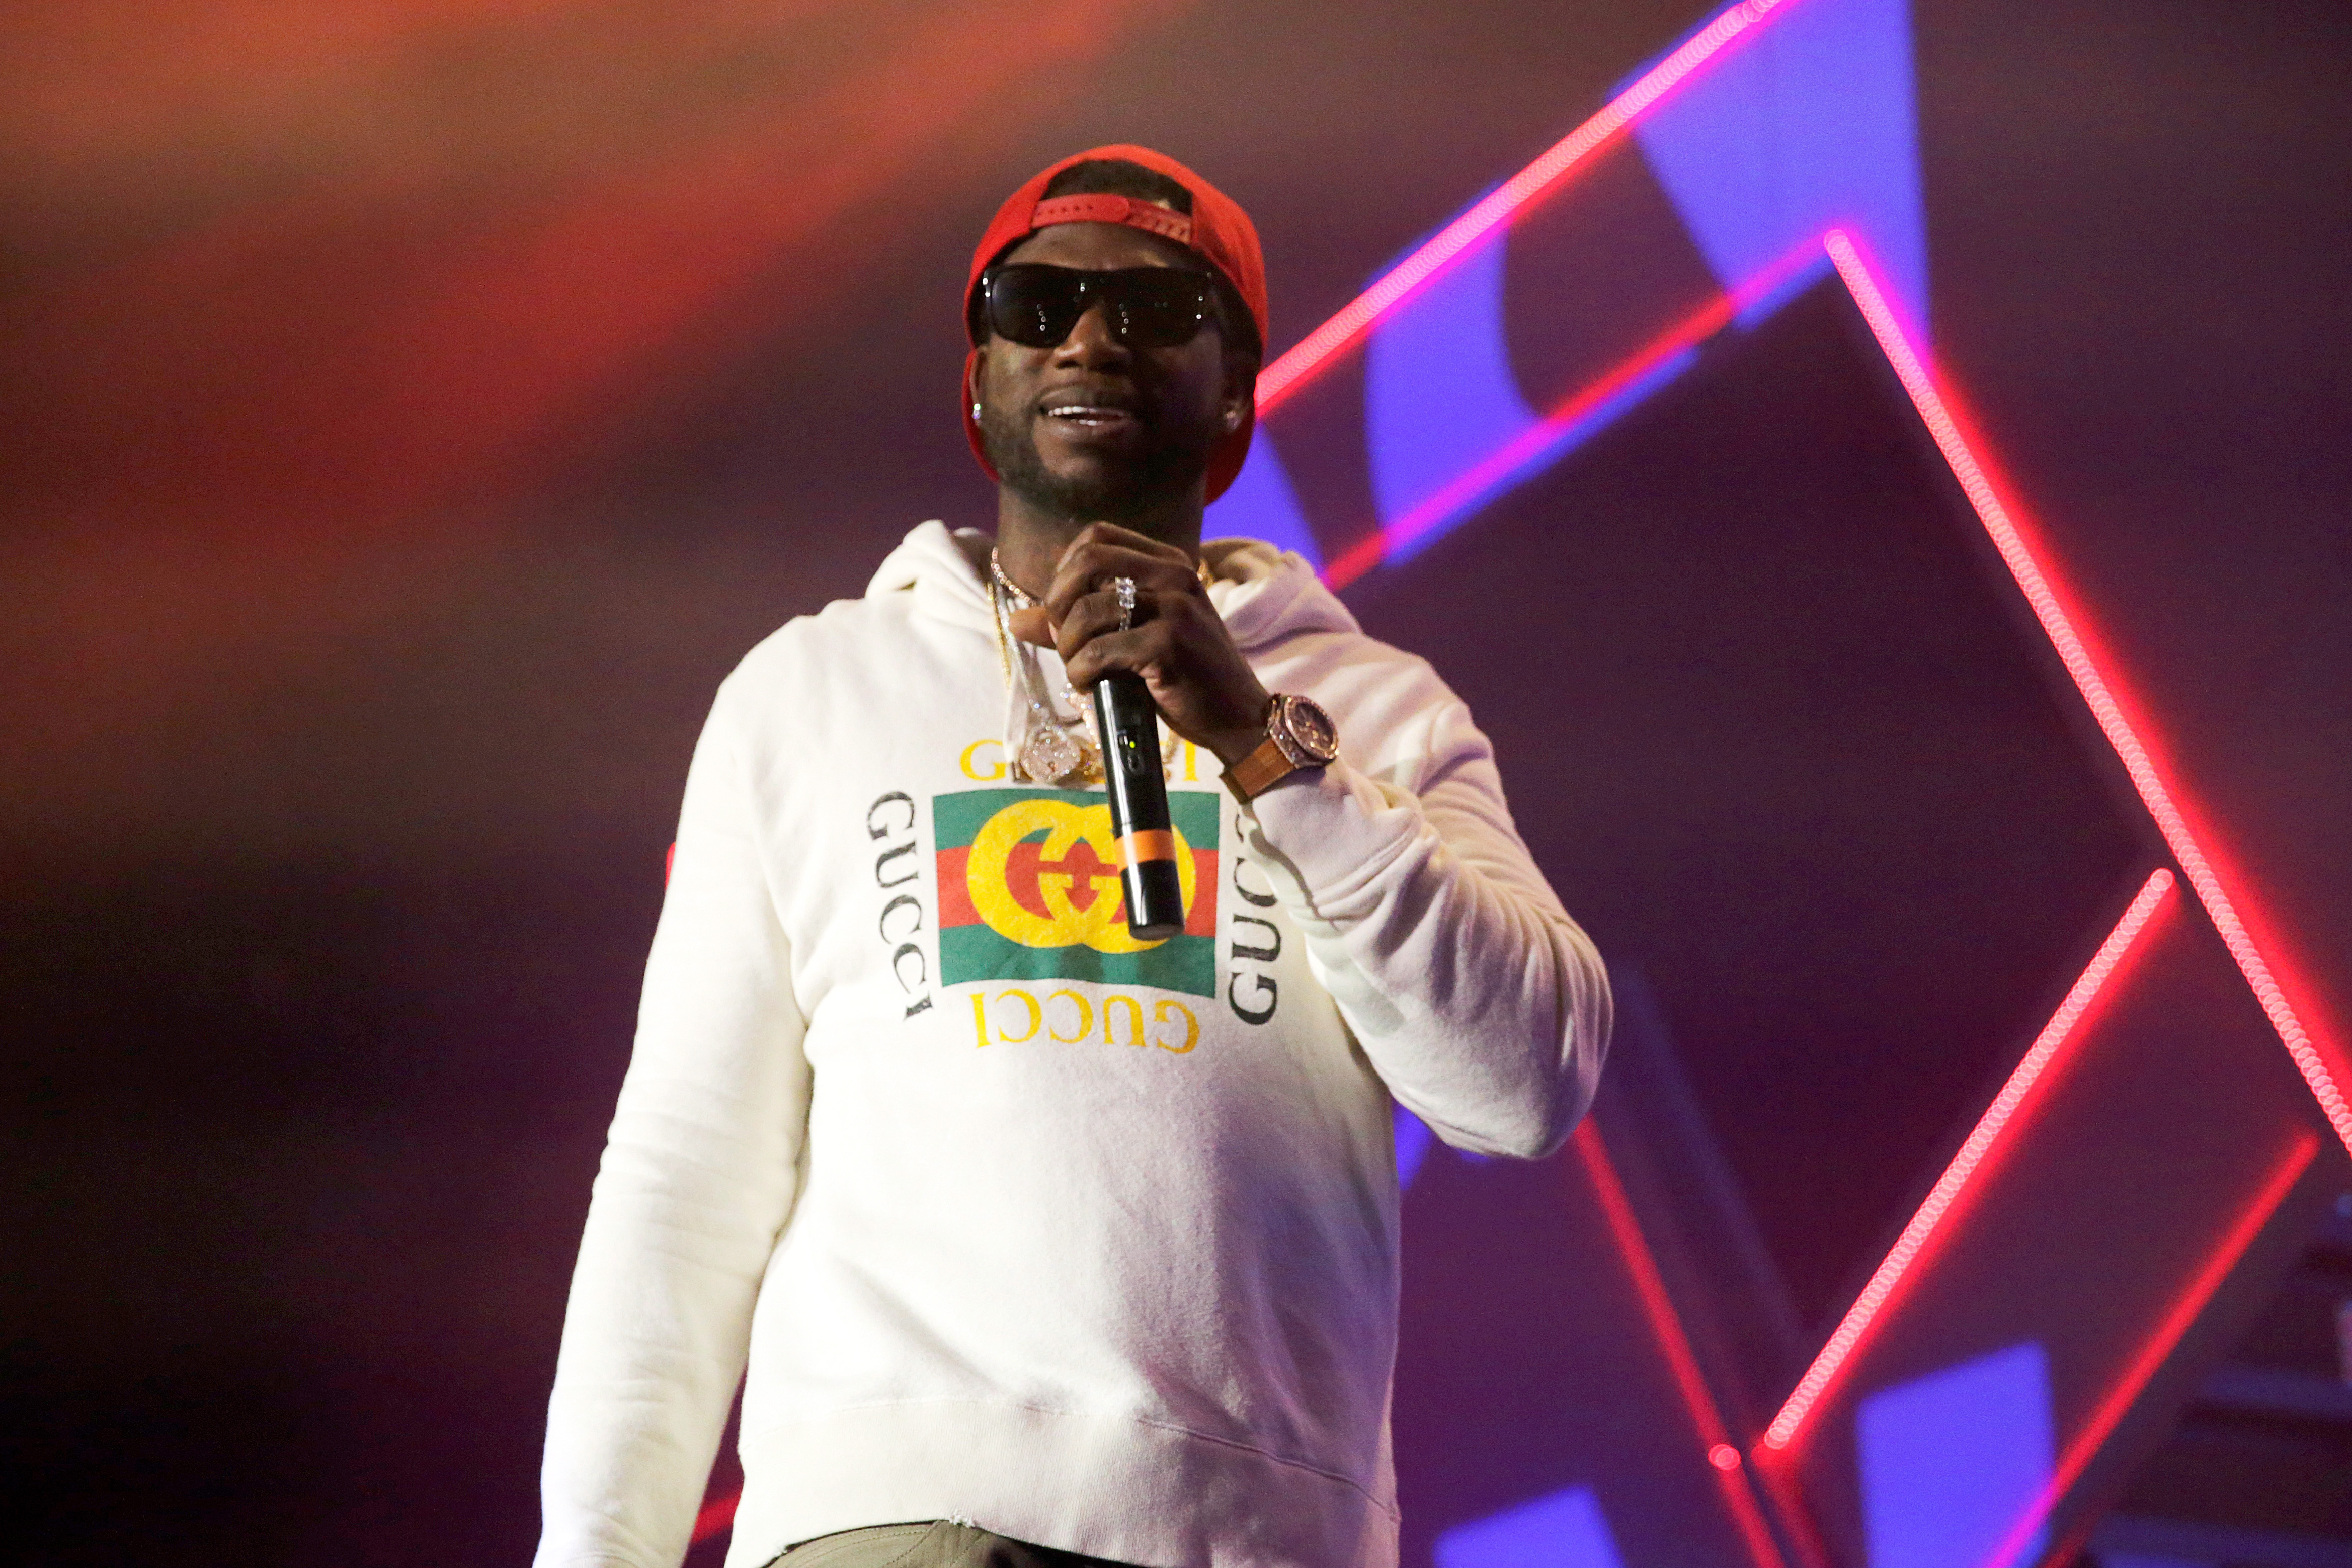 Fan Tackled By Security After Crashing Stage At Gucci Mane Concert